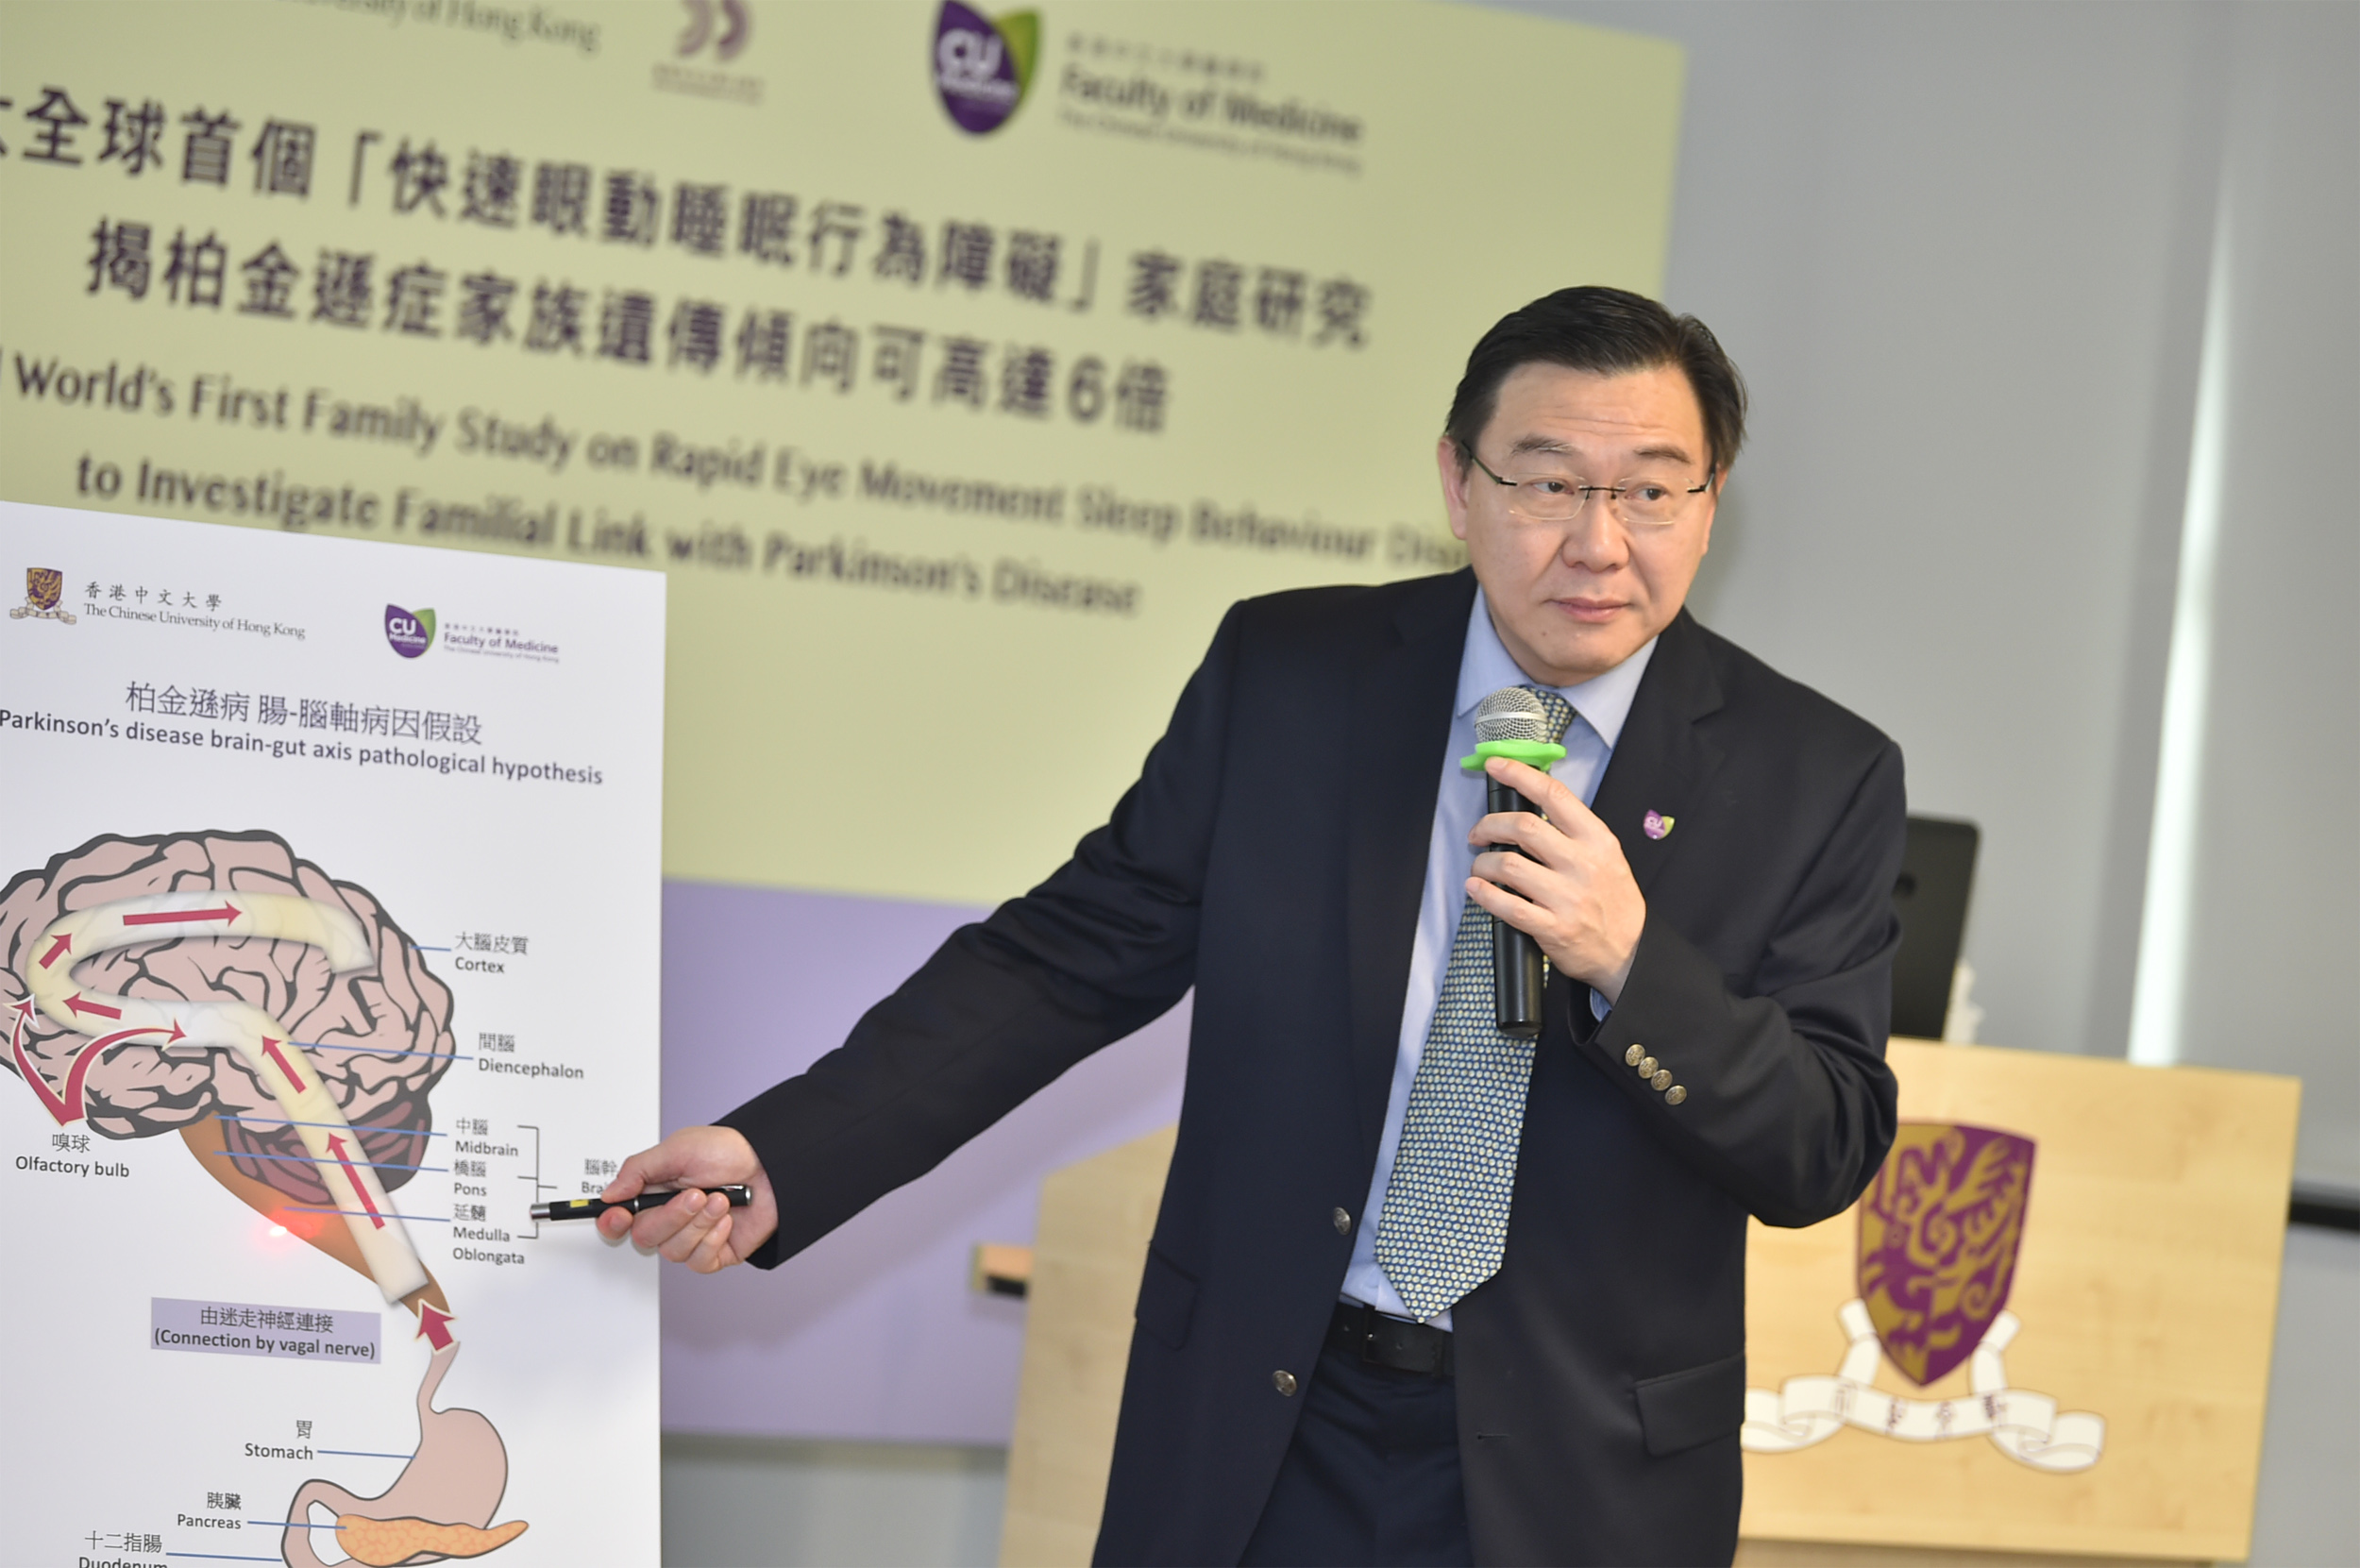 Professor Yun Kwok WING of Department of Psychiatry says gut microbiome in the gut may be the root of Parkinson’s disease.